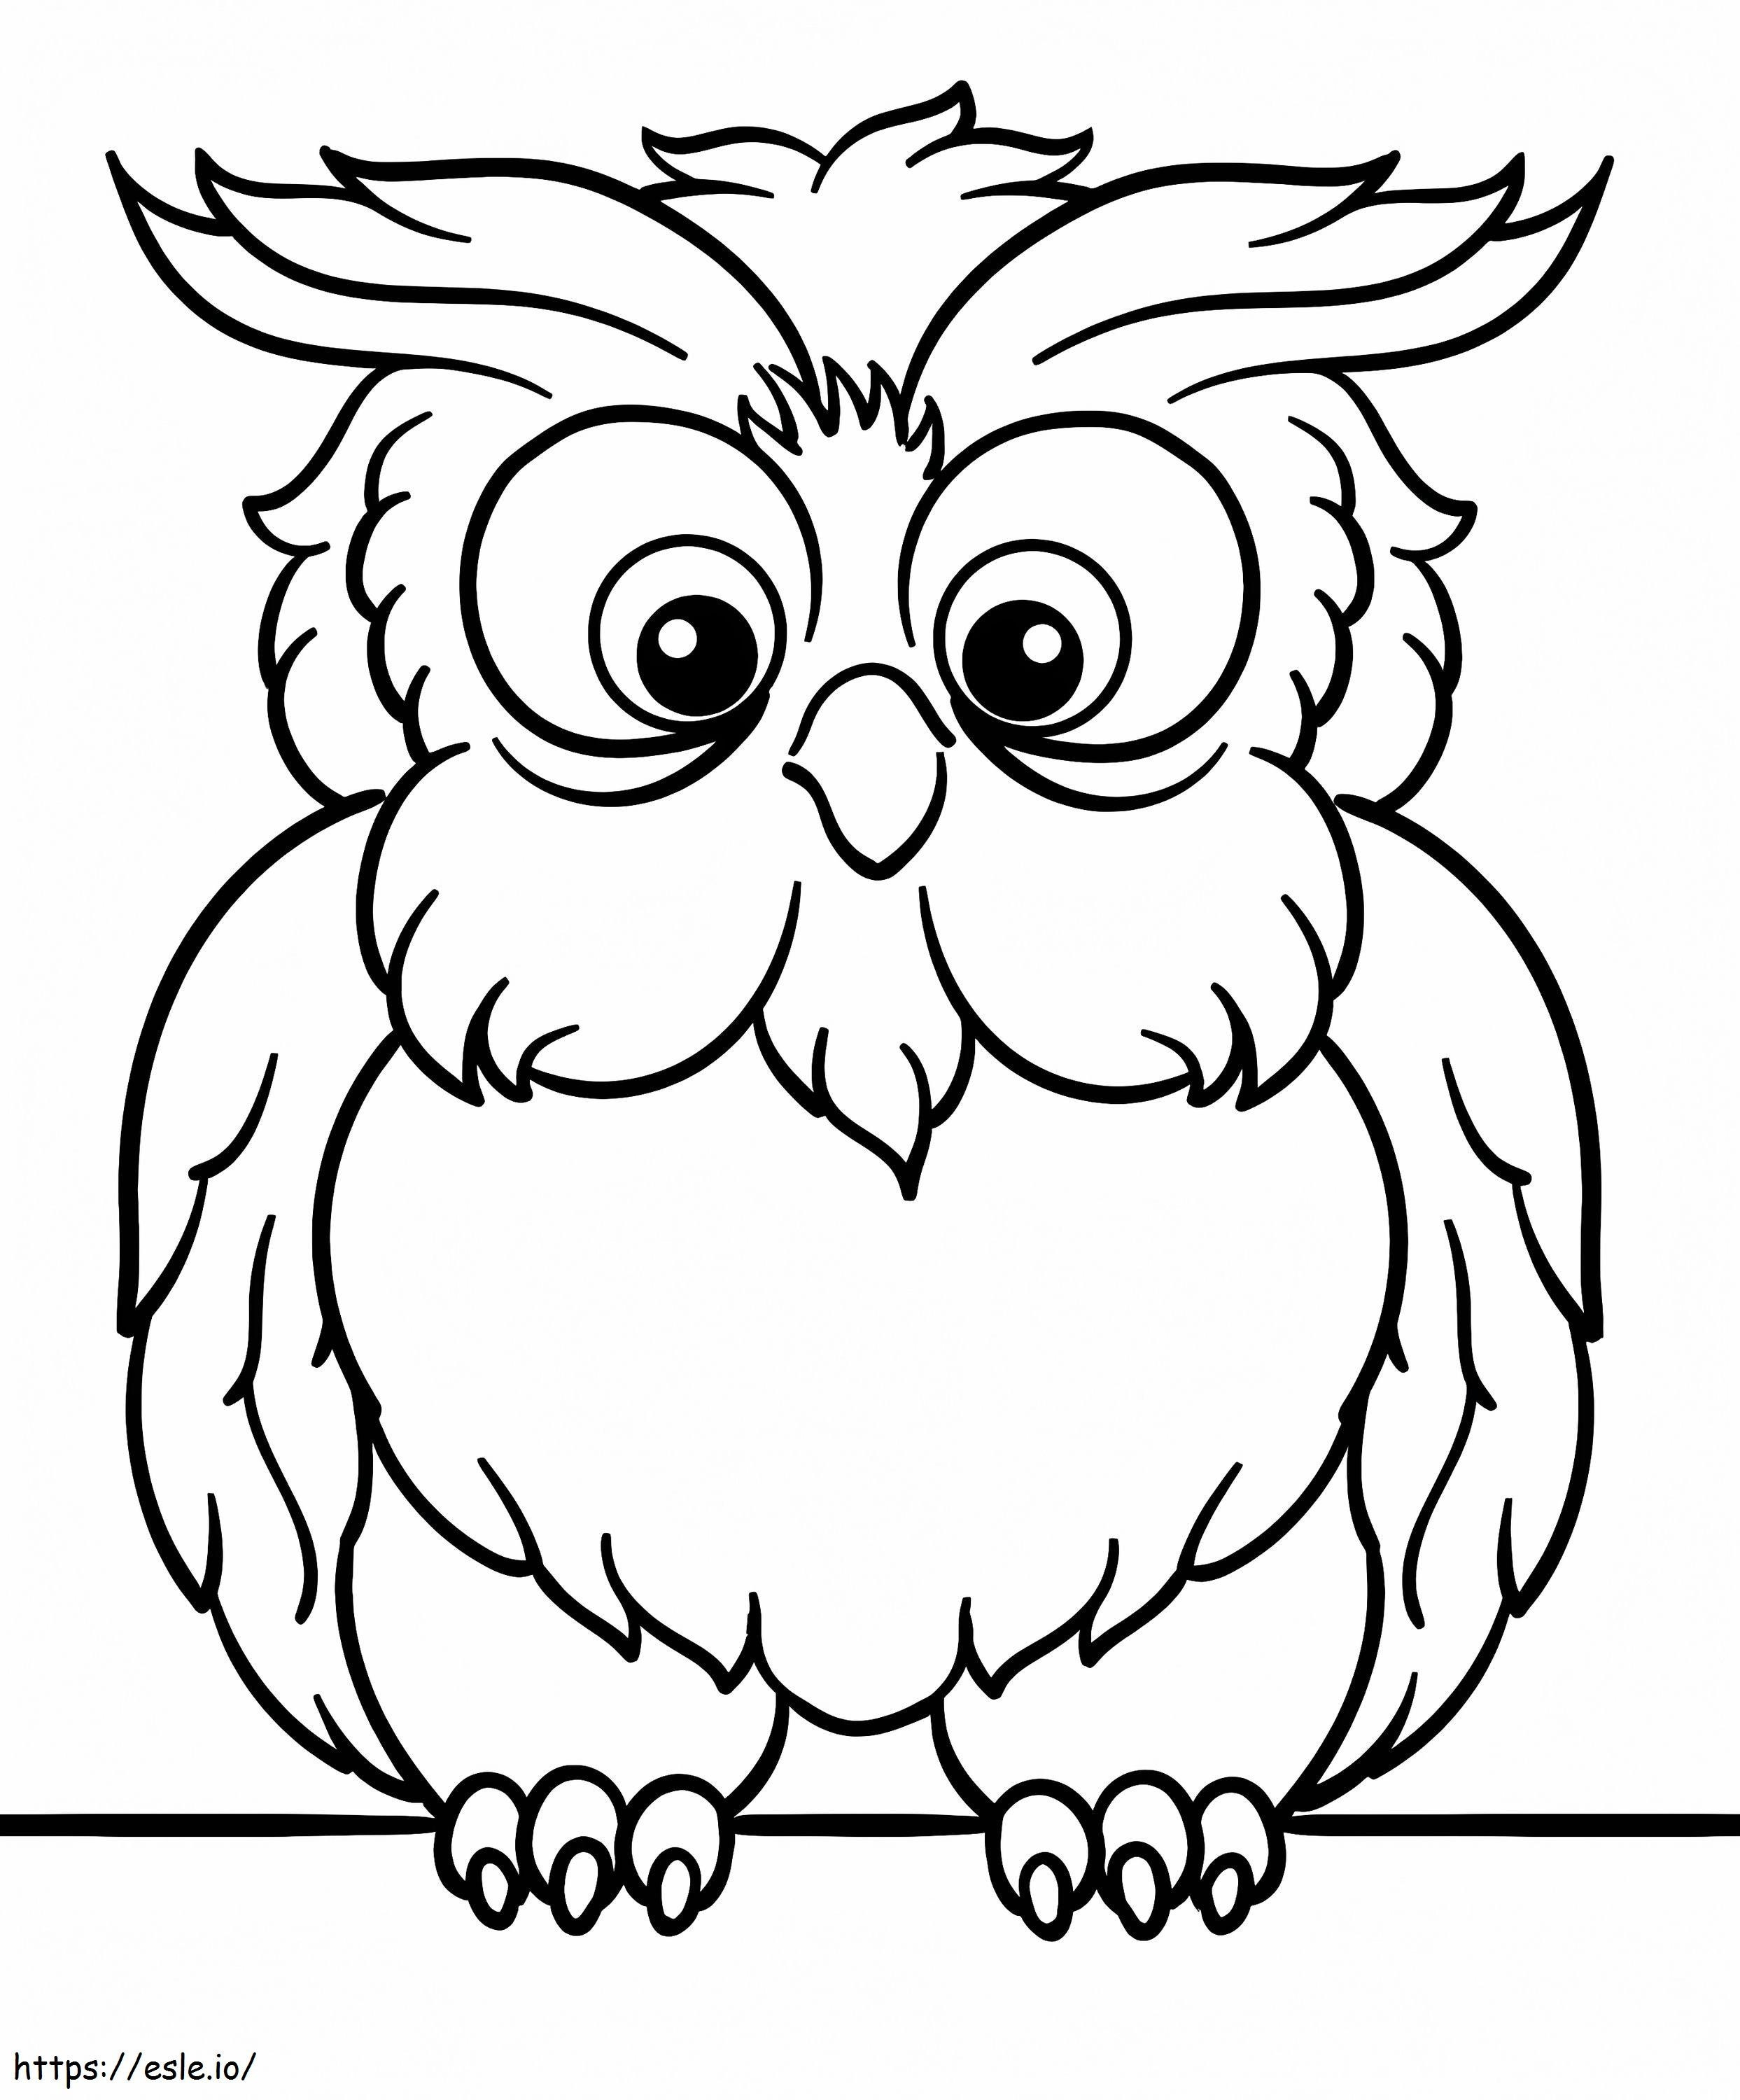 Free Owl coloring page